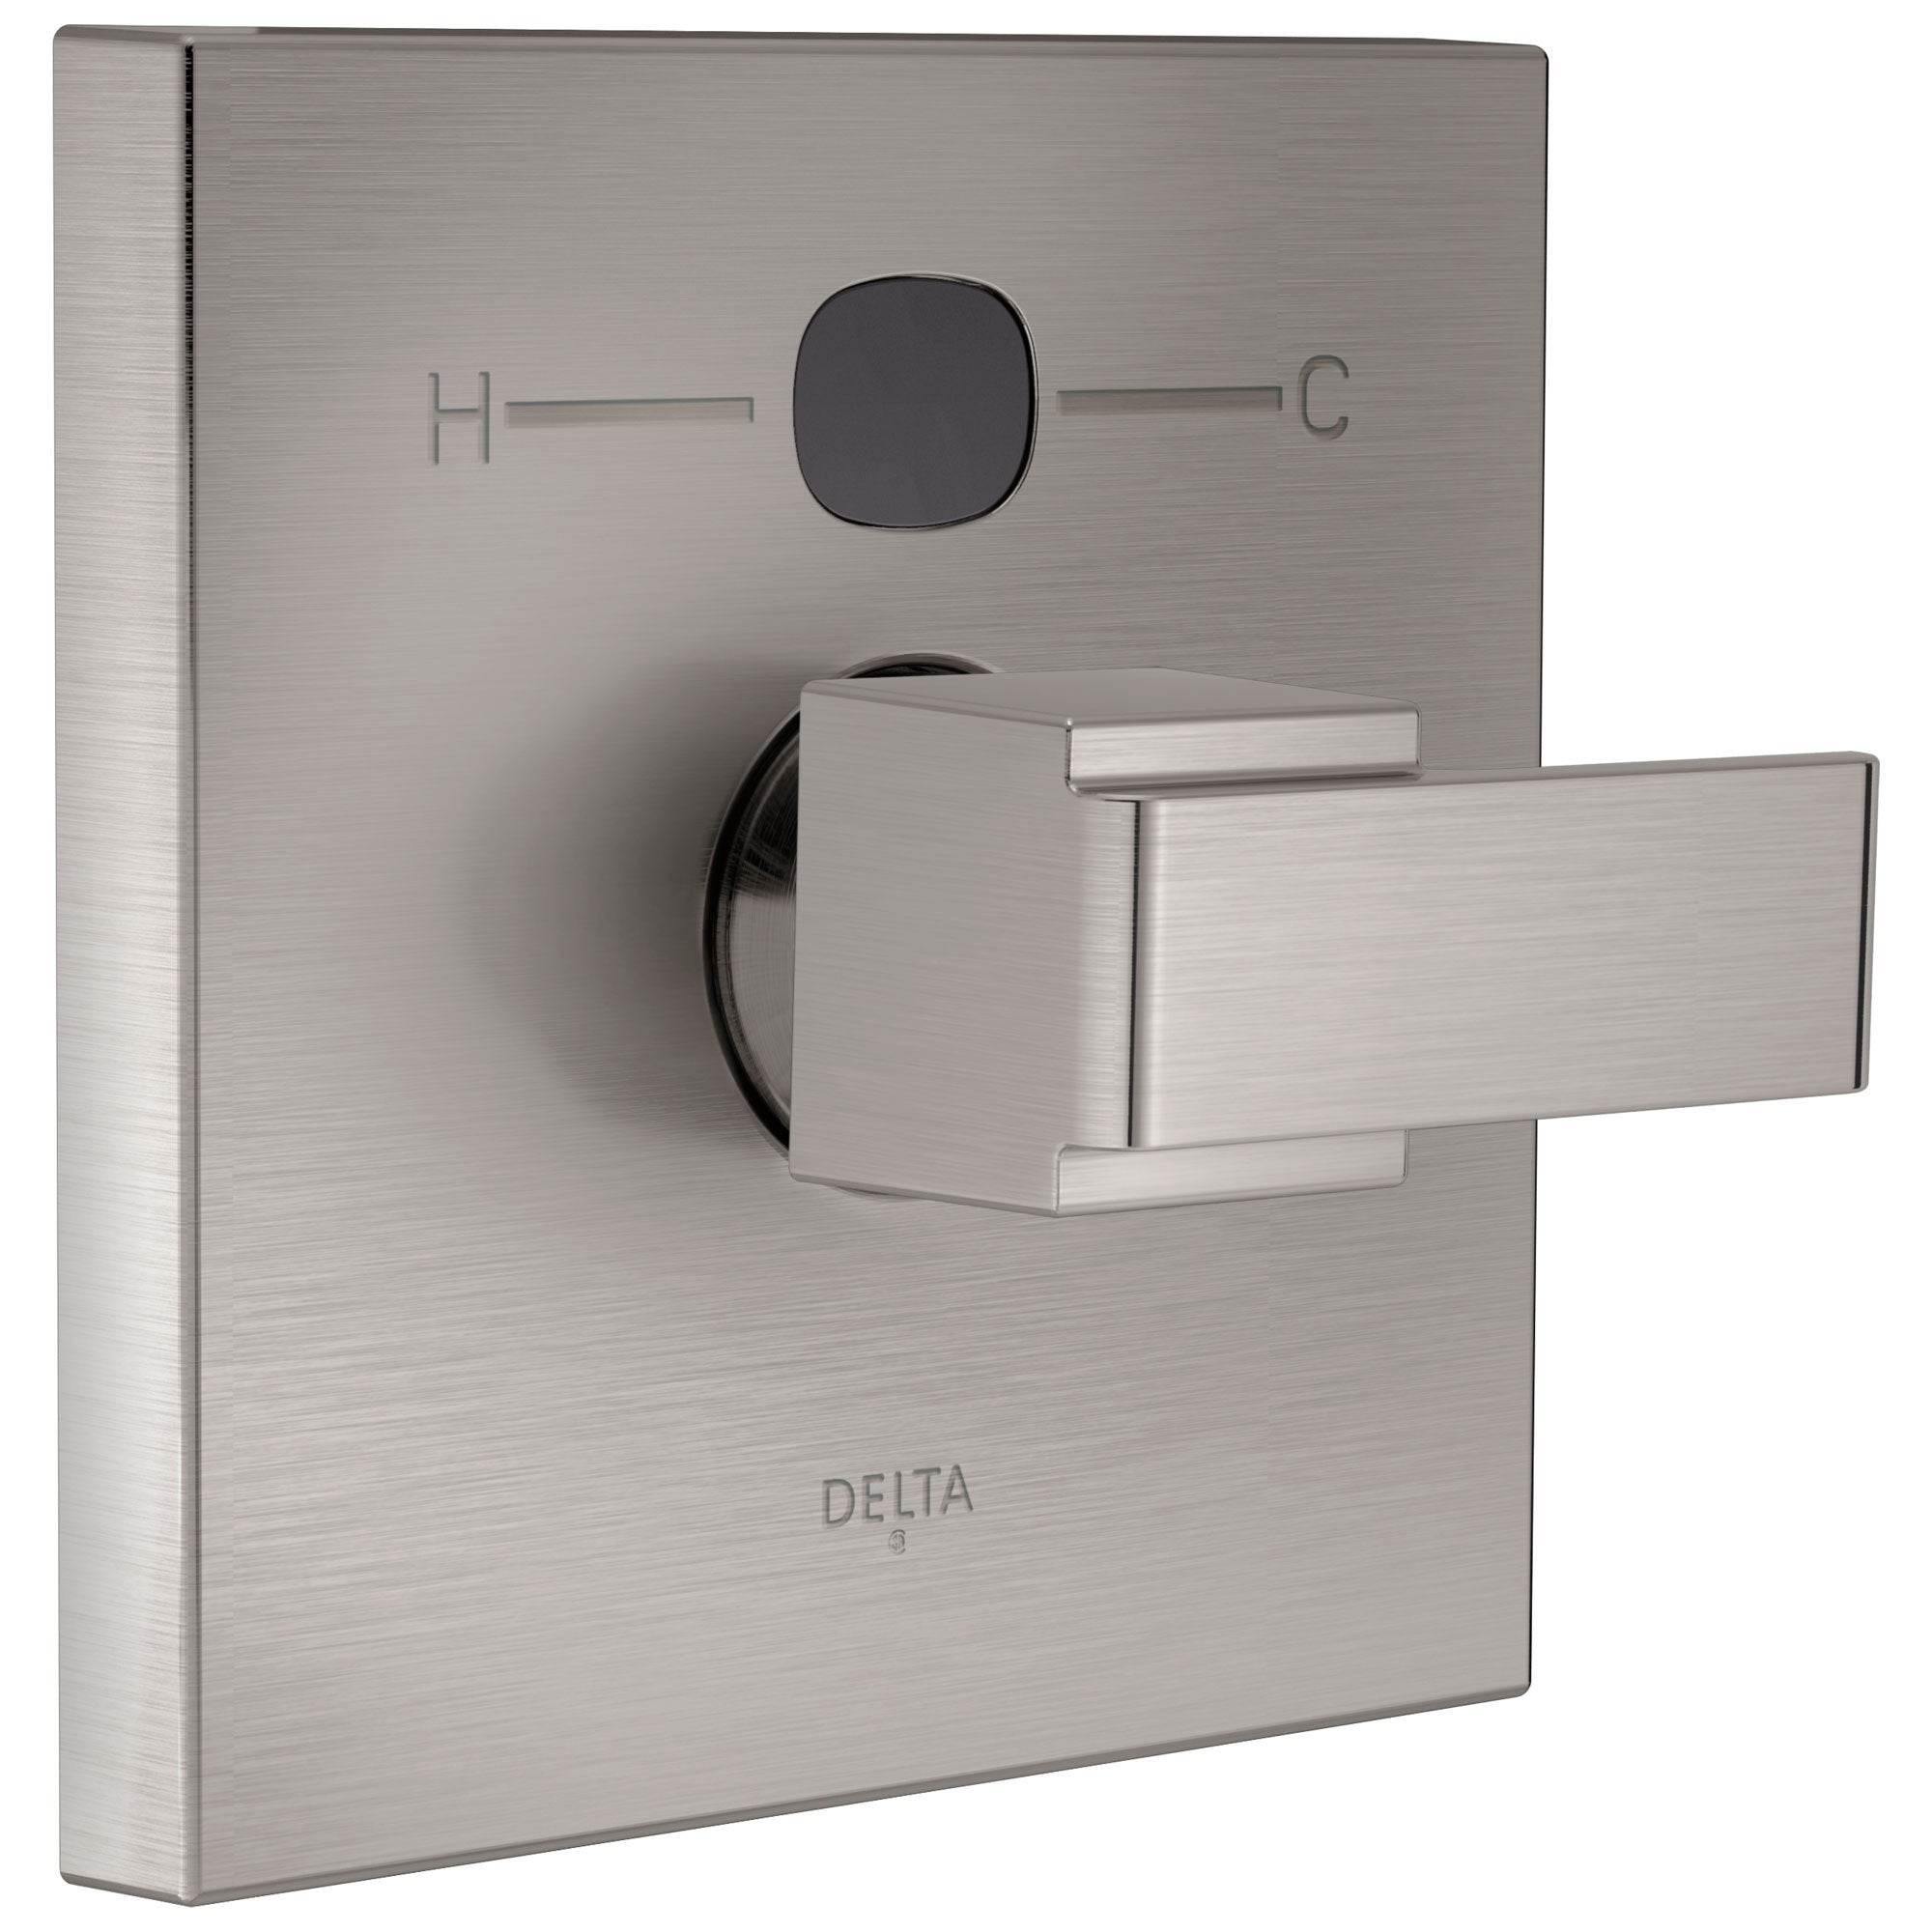 Delta Stainless Steel Finish Ara Temp2O Modern Square Electronic Shower Faucet Valve Only Control INCLUDES Single Lever Handle and Valve without Stops D1876V